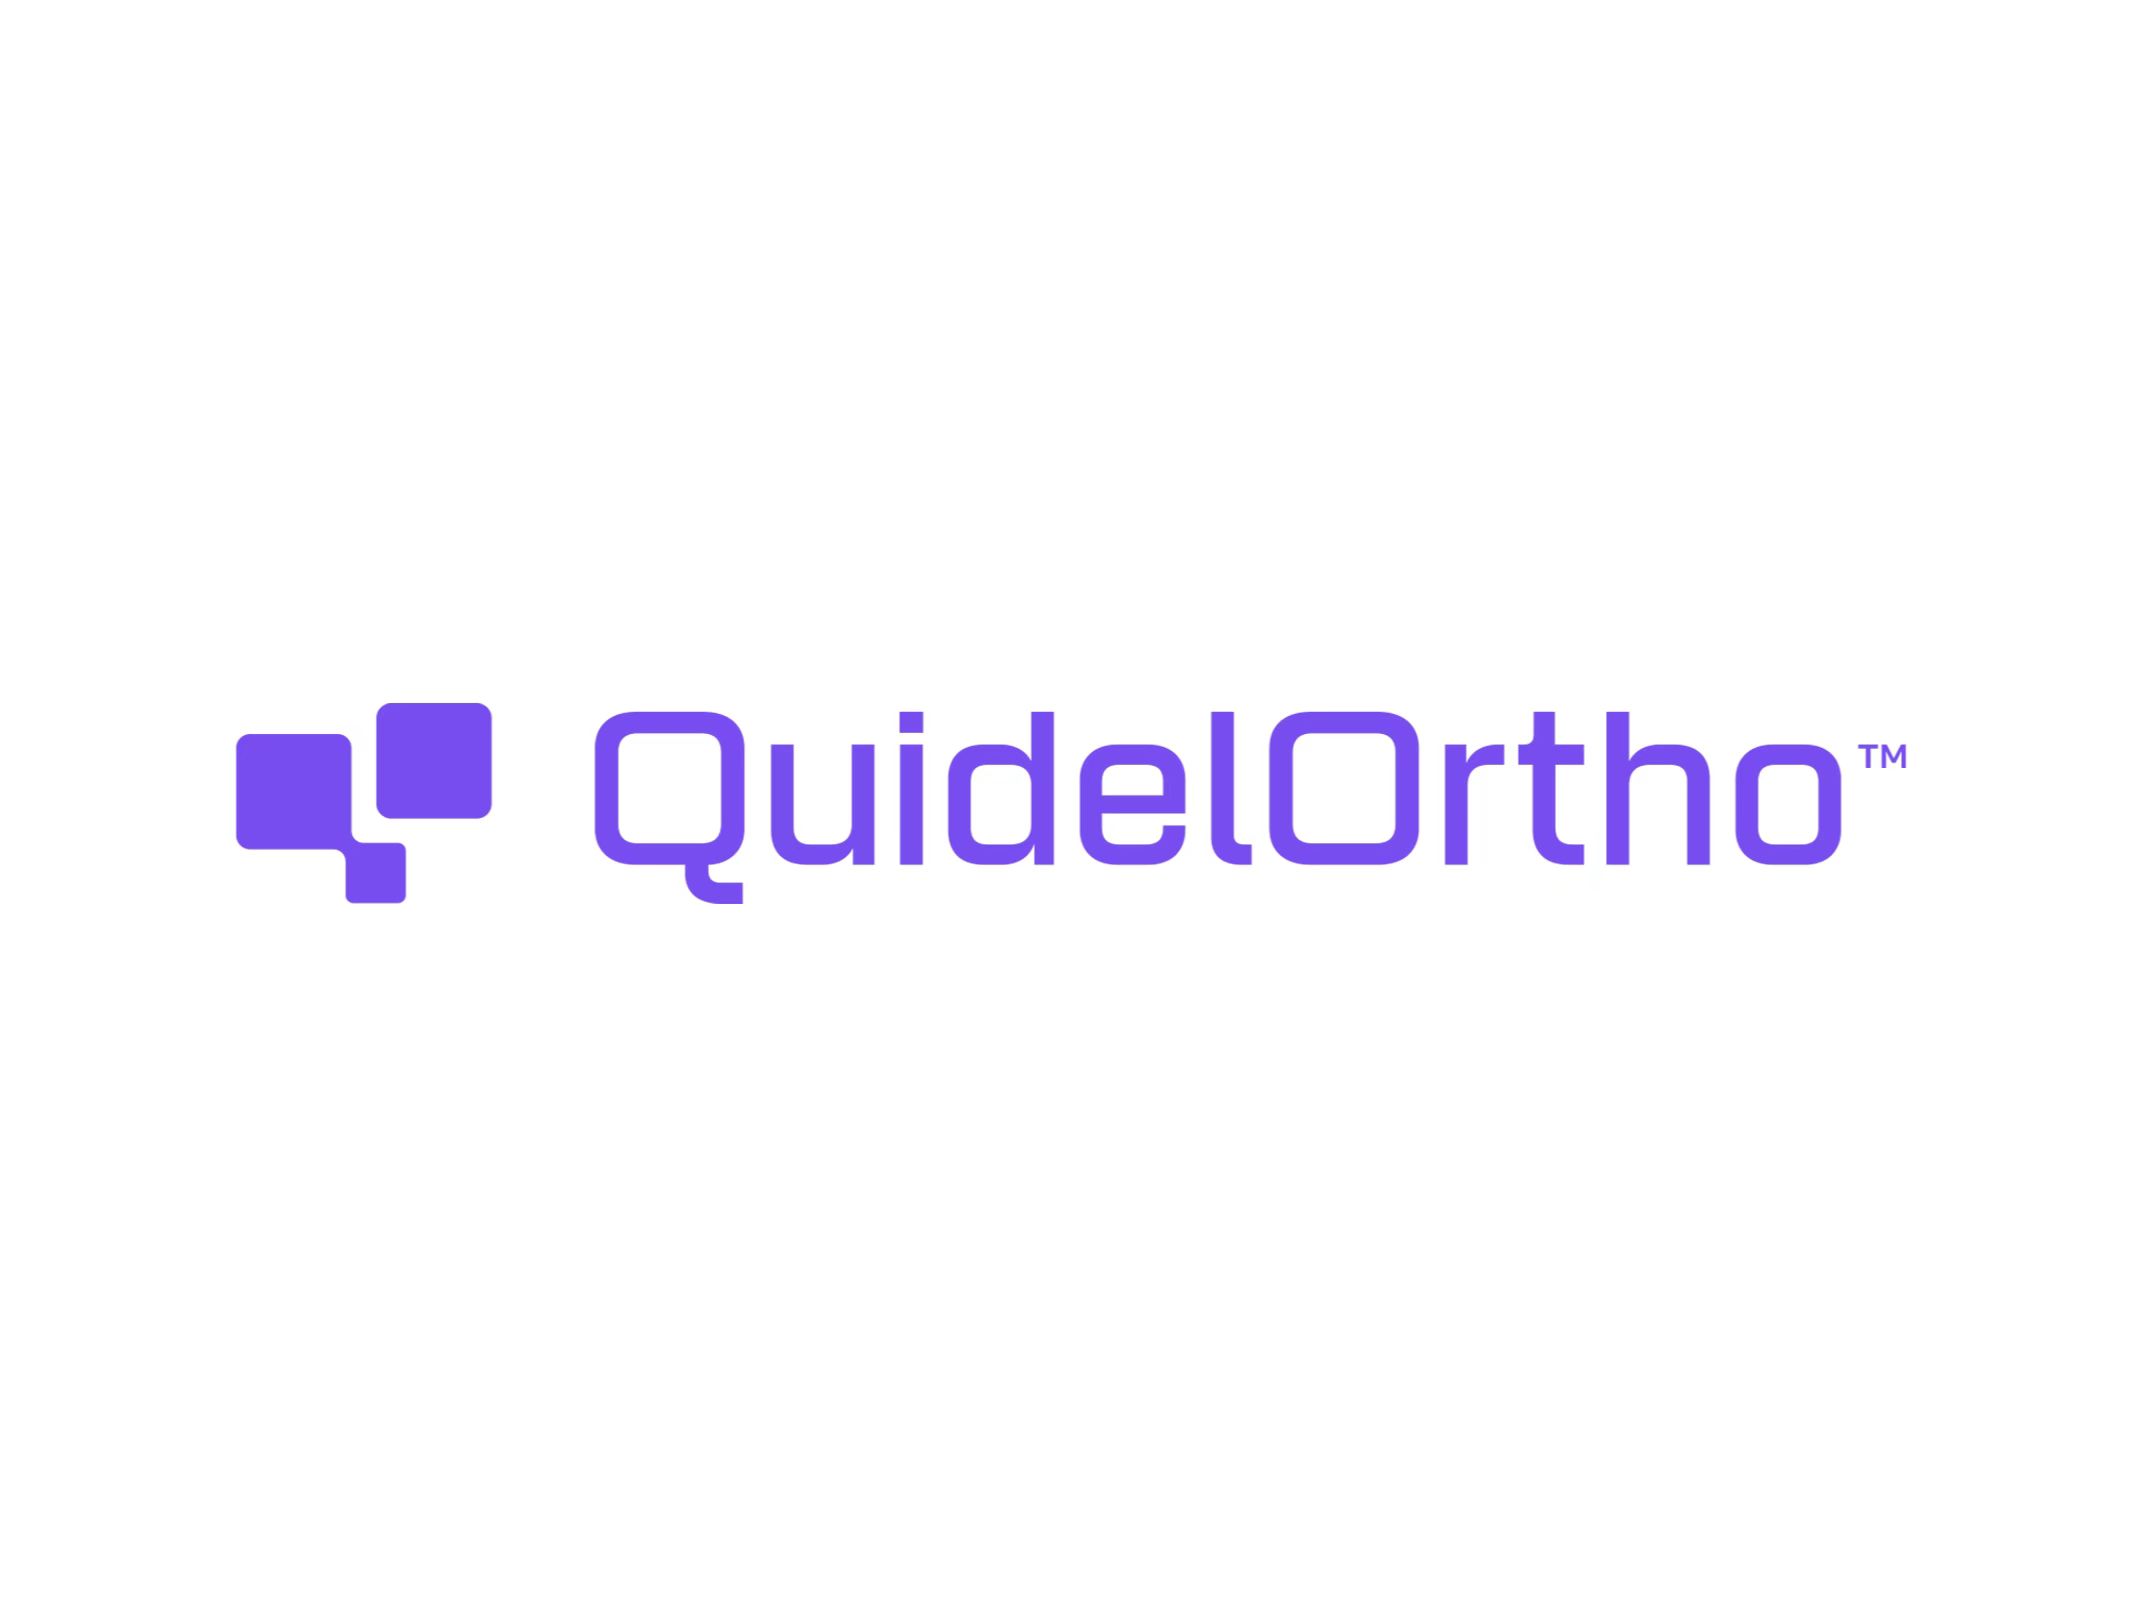 QuidelOrtho Receives FDA 510(k) Clearance for Its QuickVue® COVID-19 Test